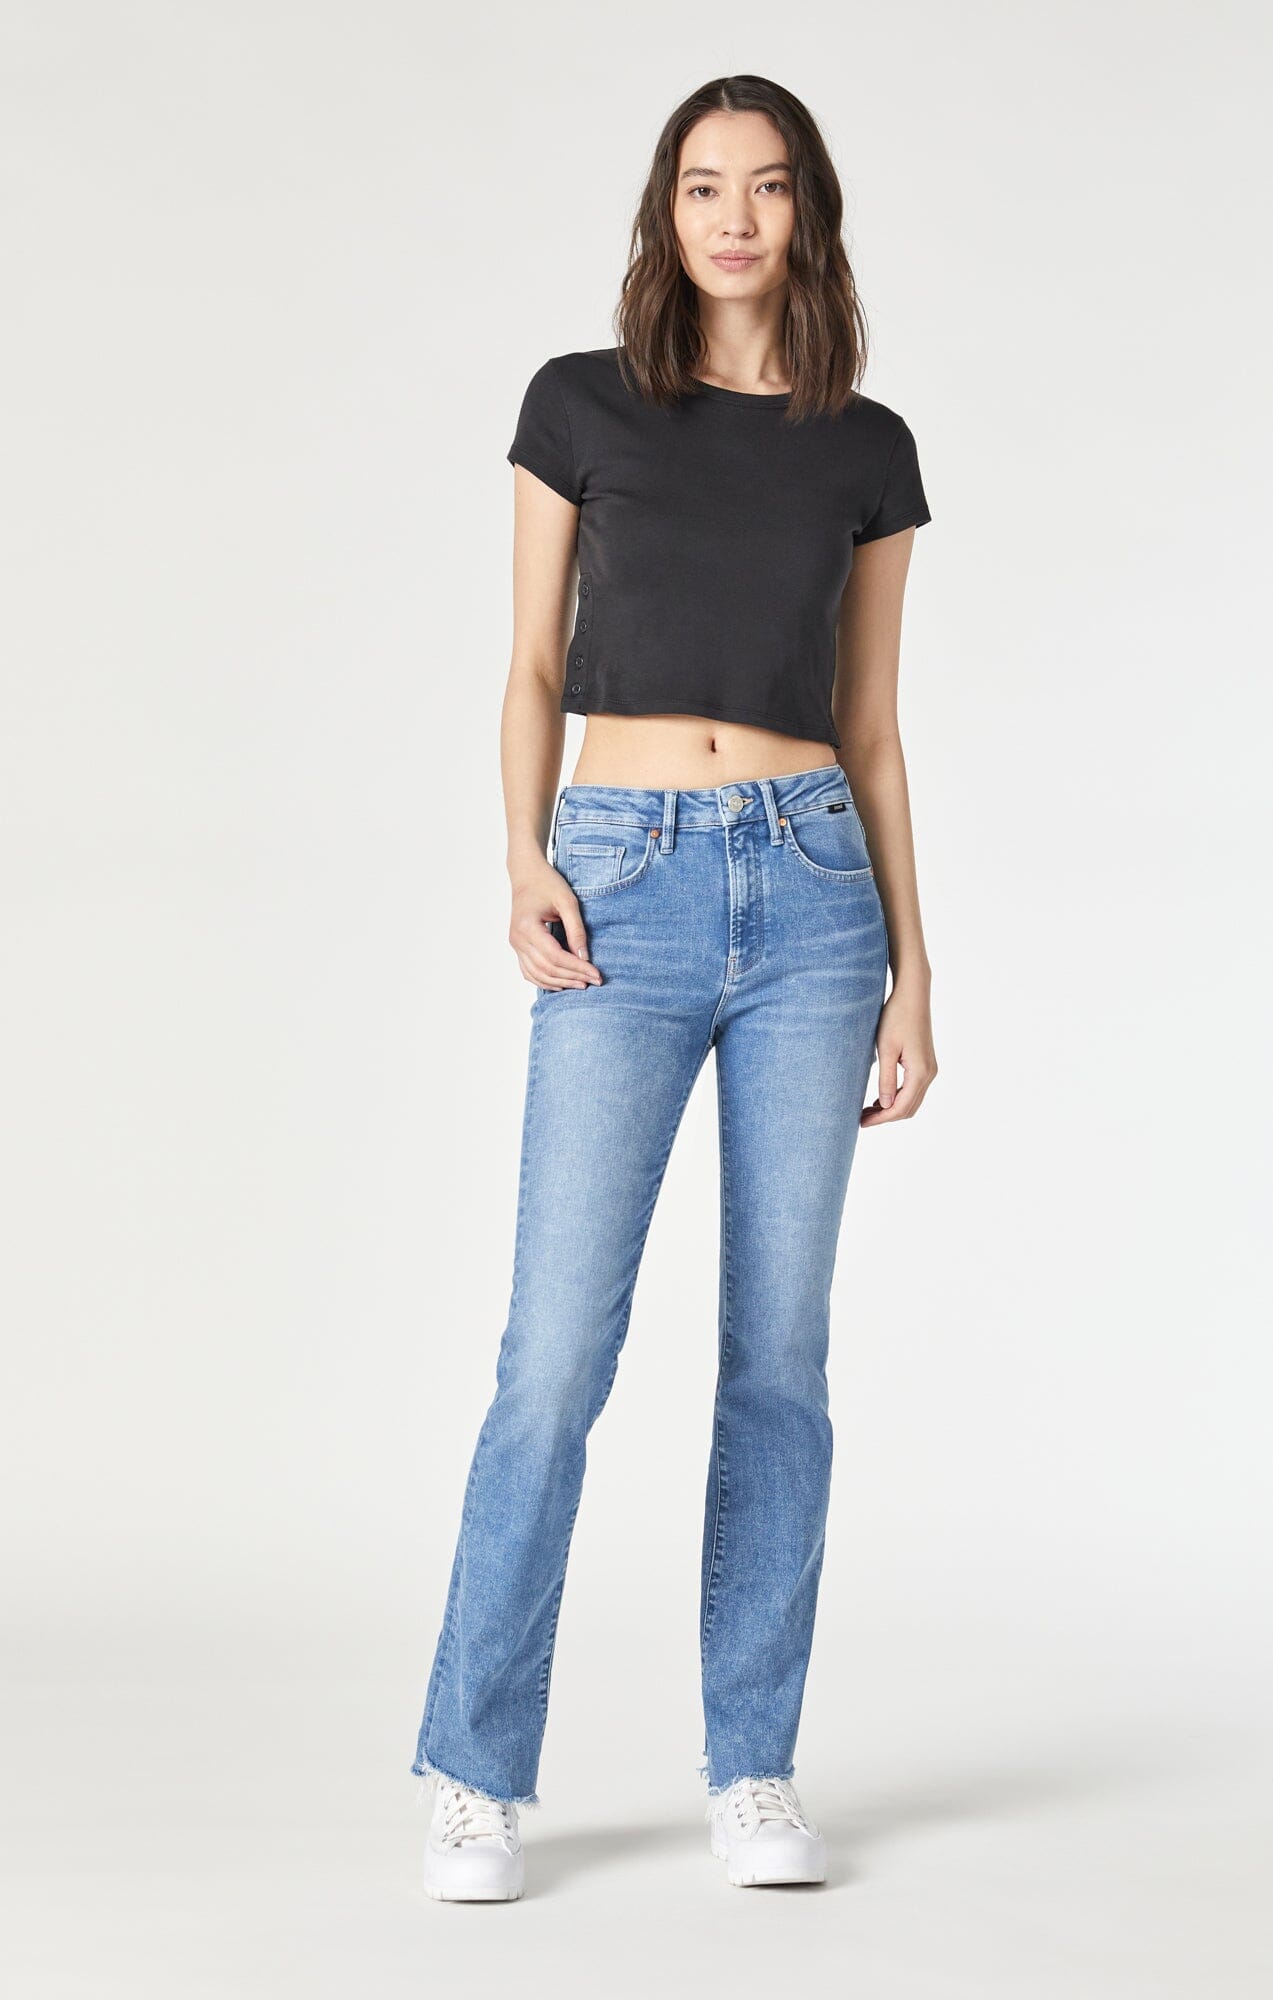 Levi's Wedgie Straight Jeans Are 40% Off Until Midnight